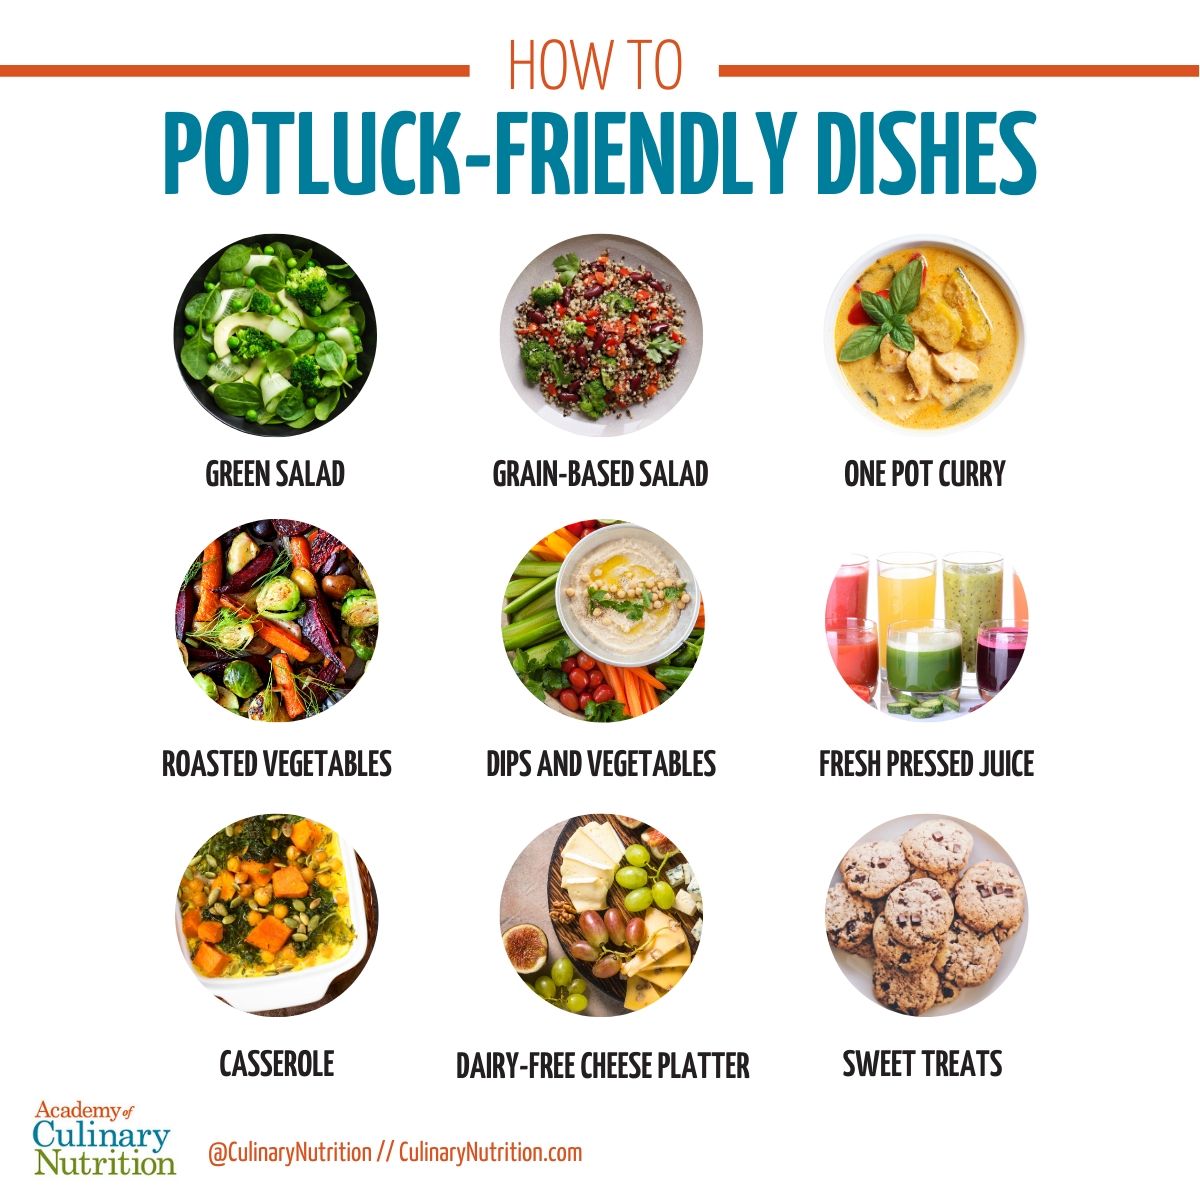 Potluck-Friendly Dishes